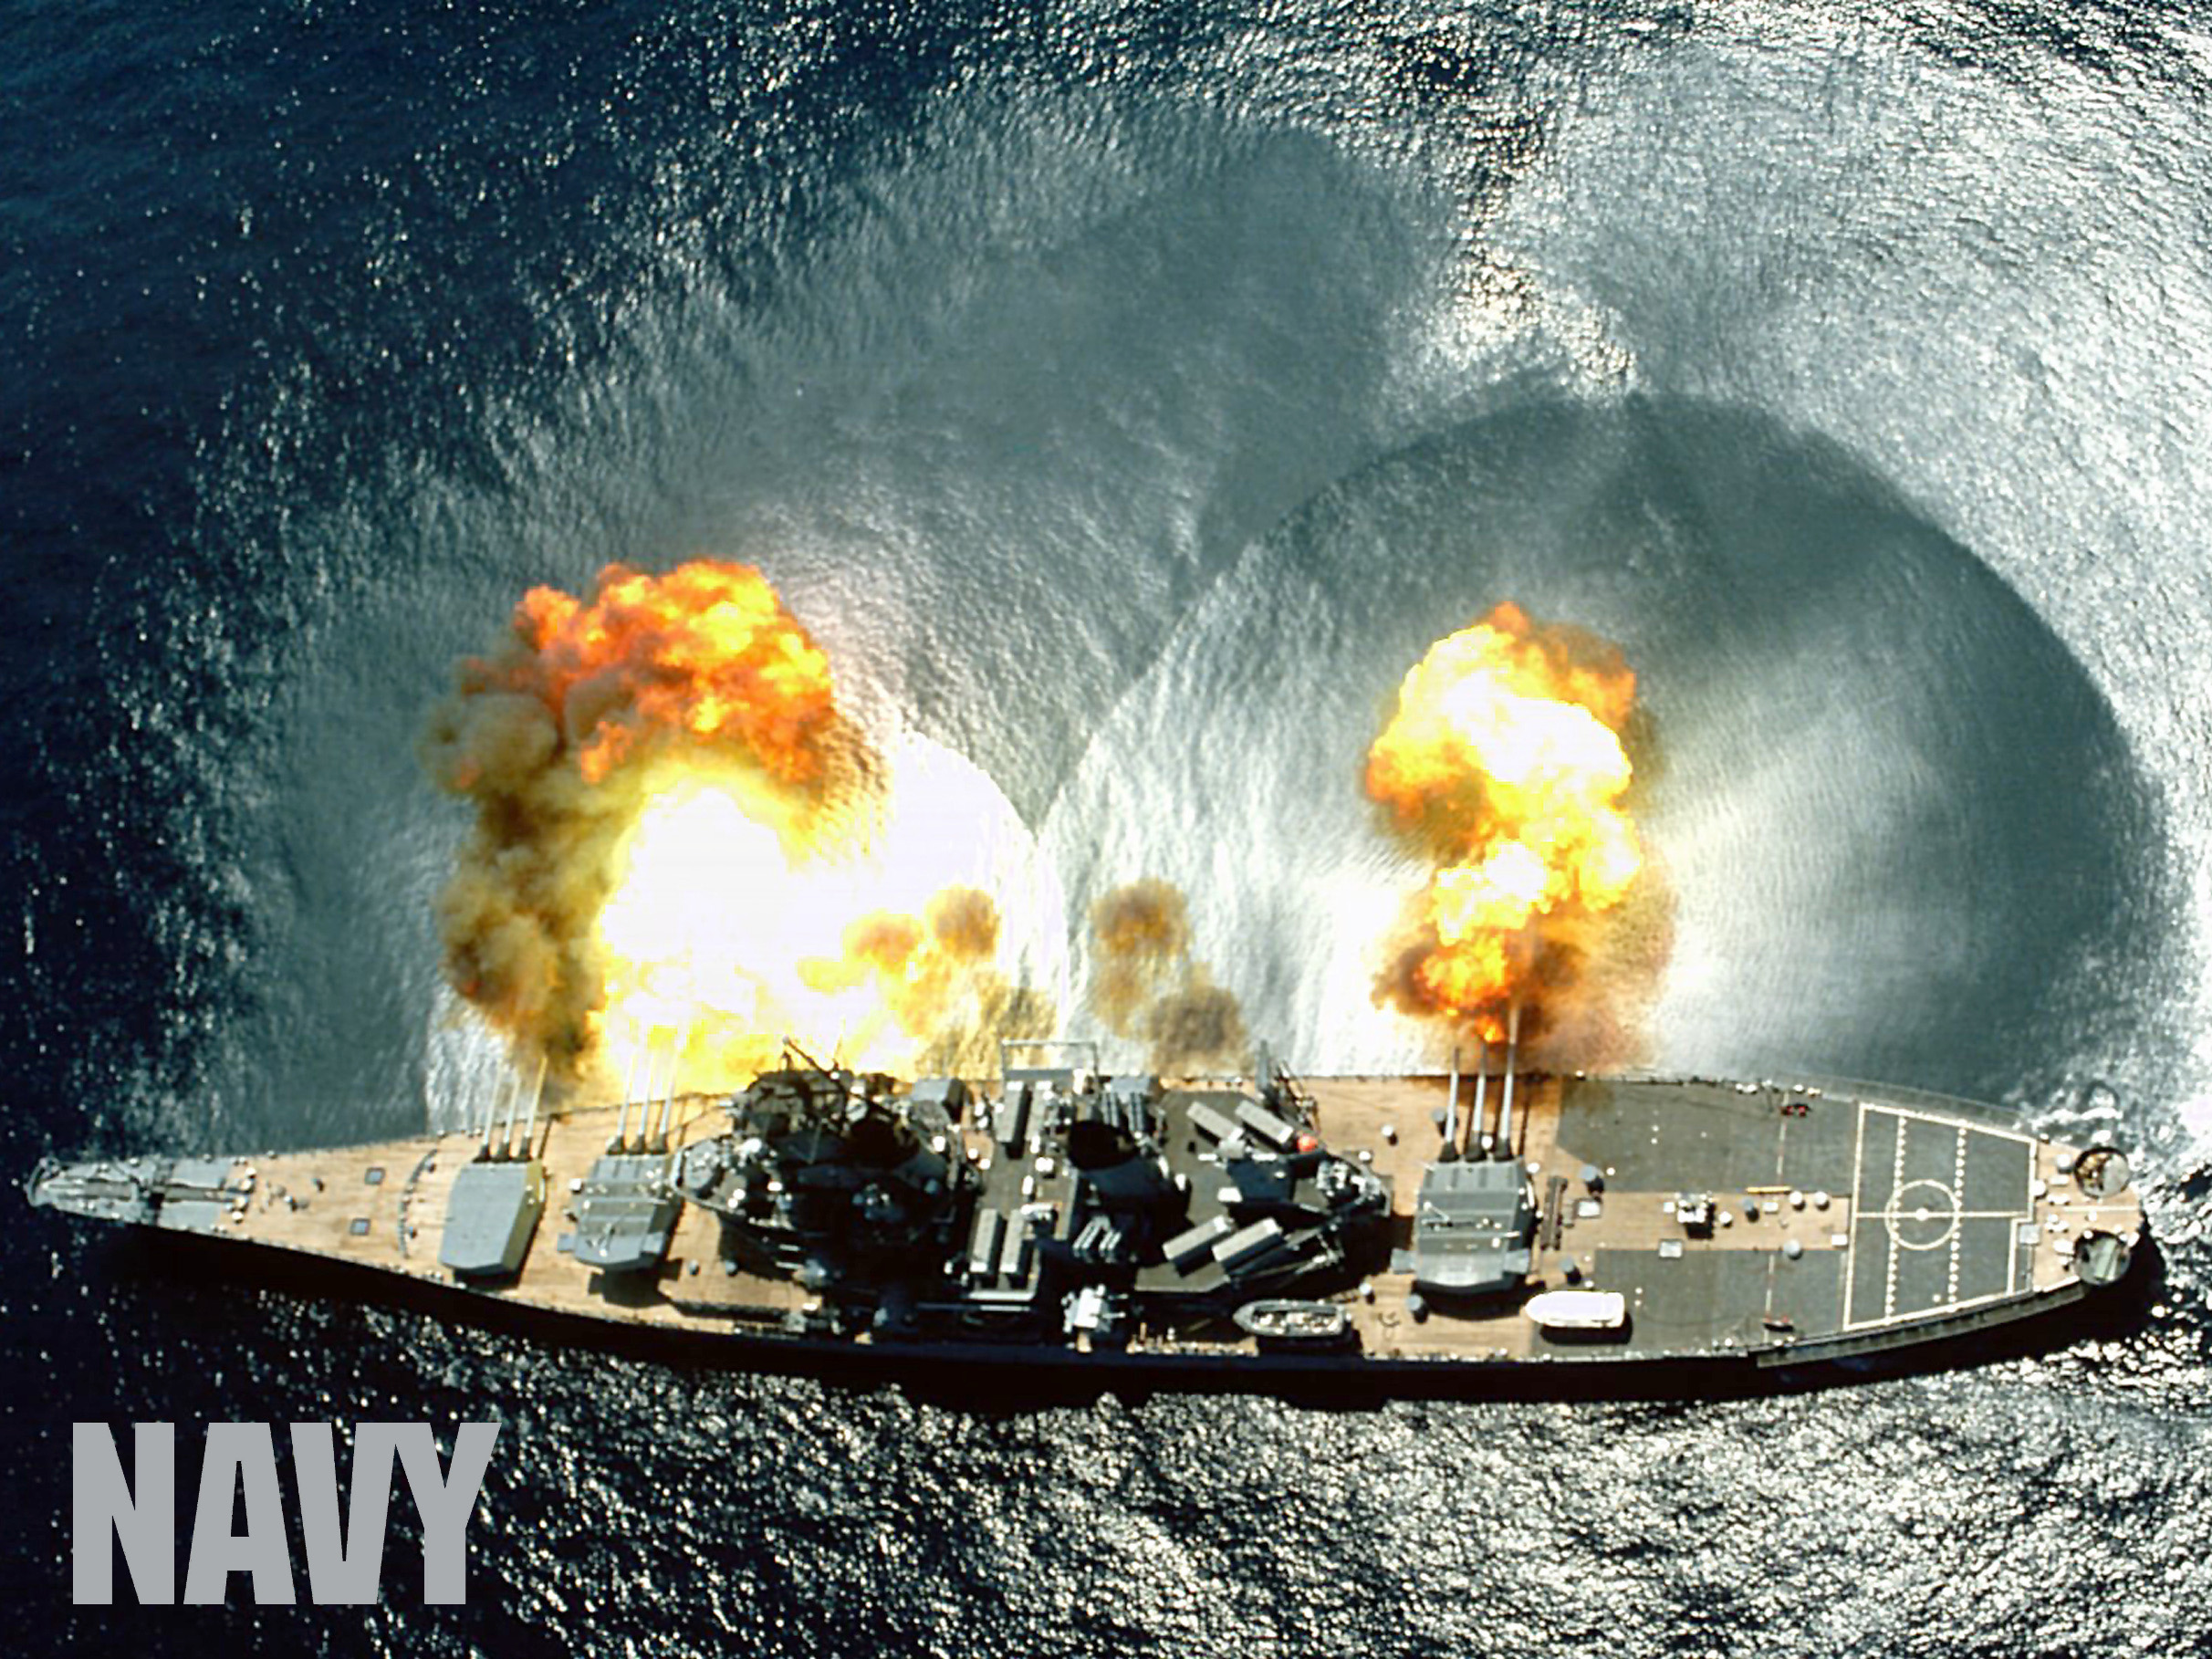 Aerial view of USS Iowa firing and the resulting shockwave on the water with the United States Navy logo type.